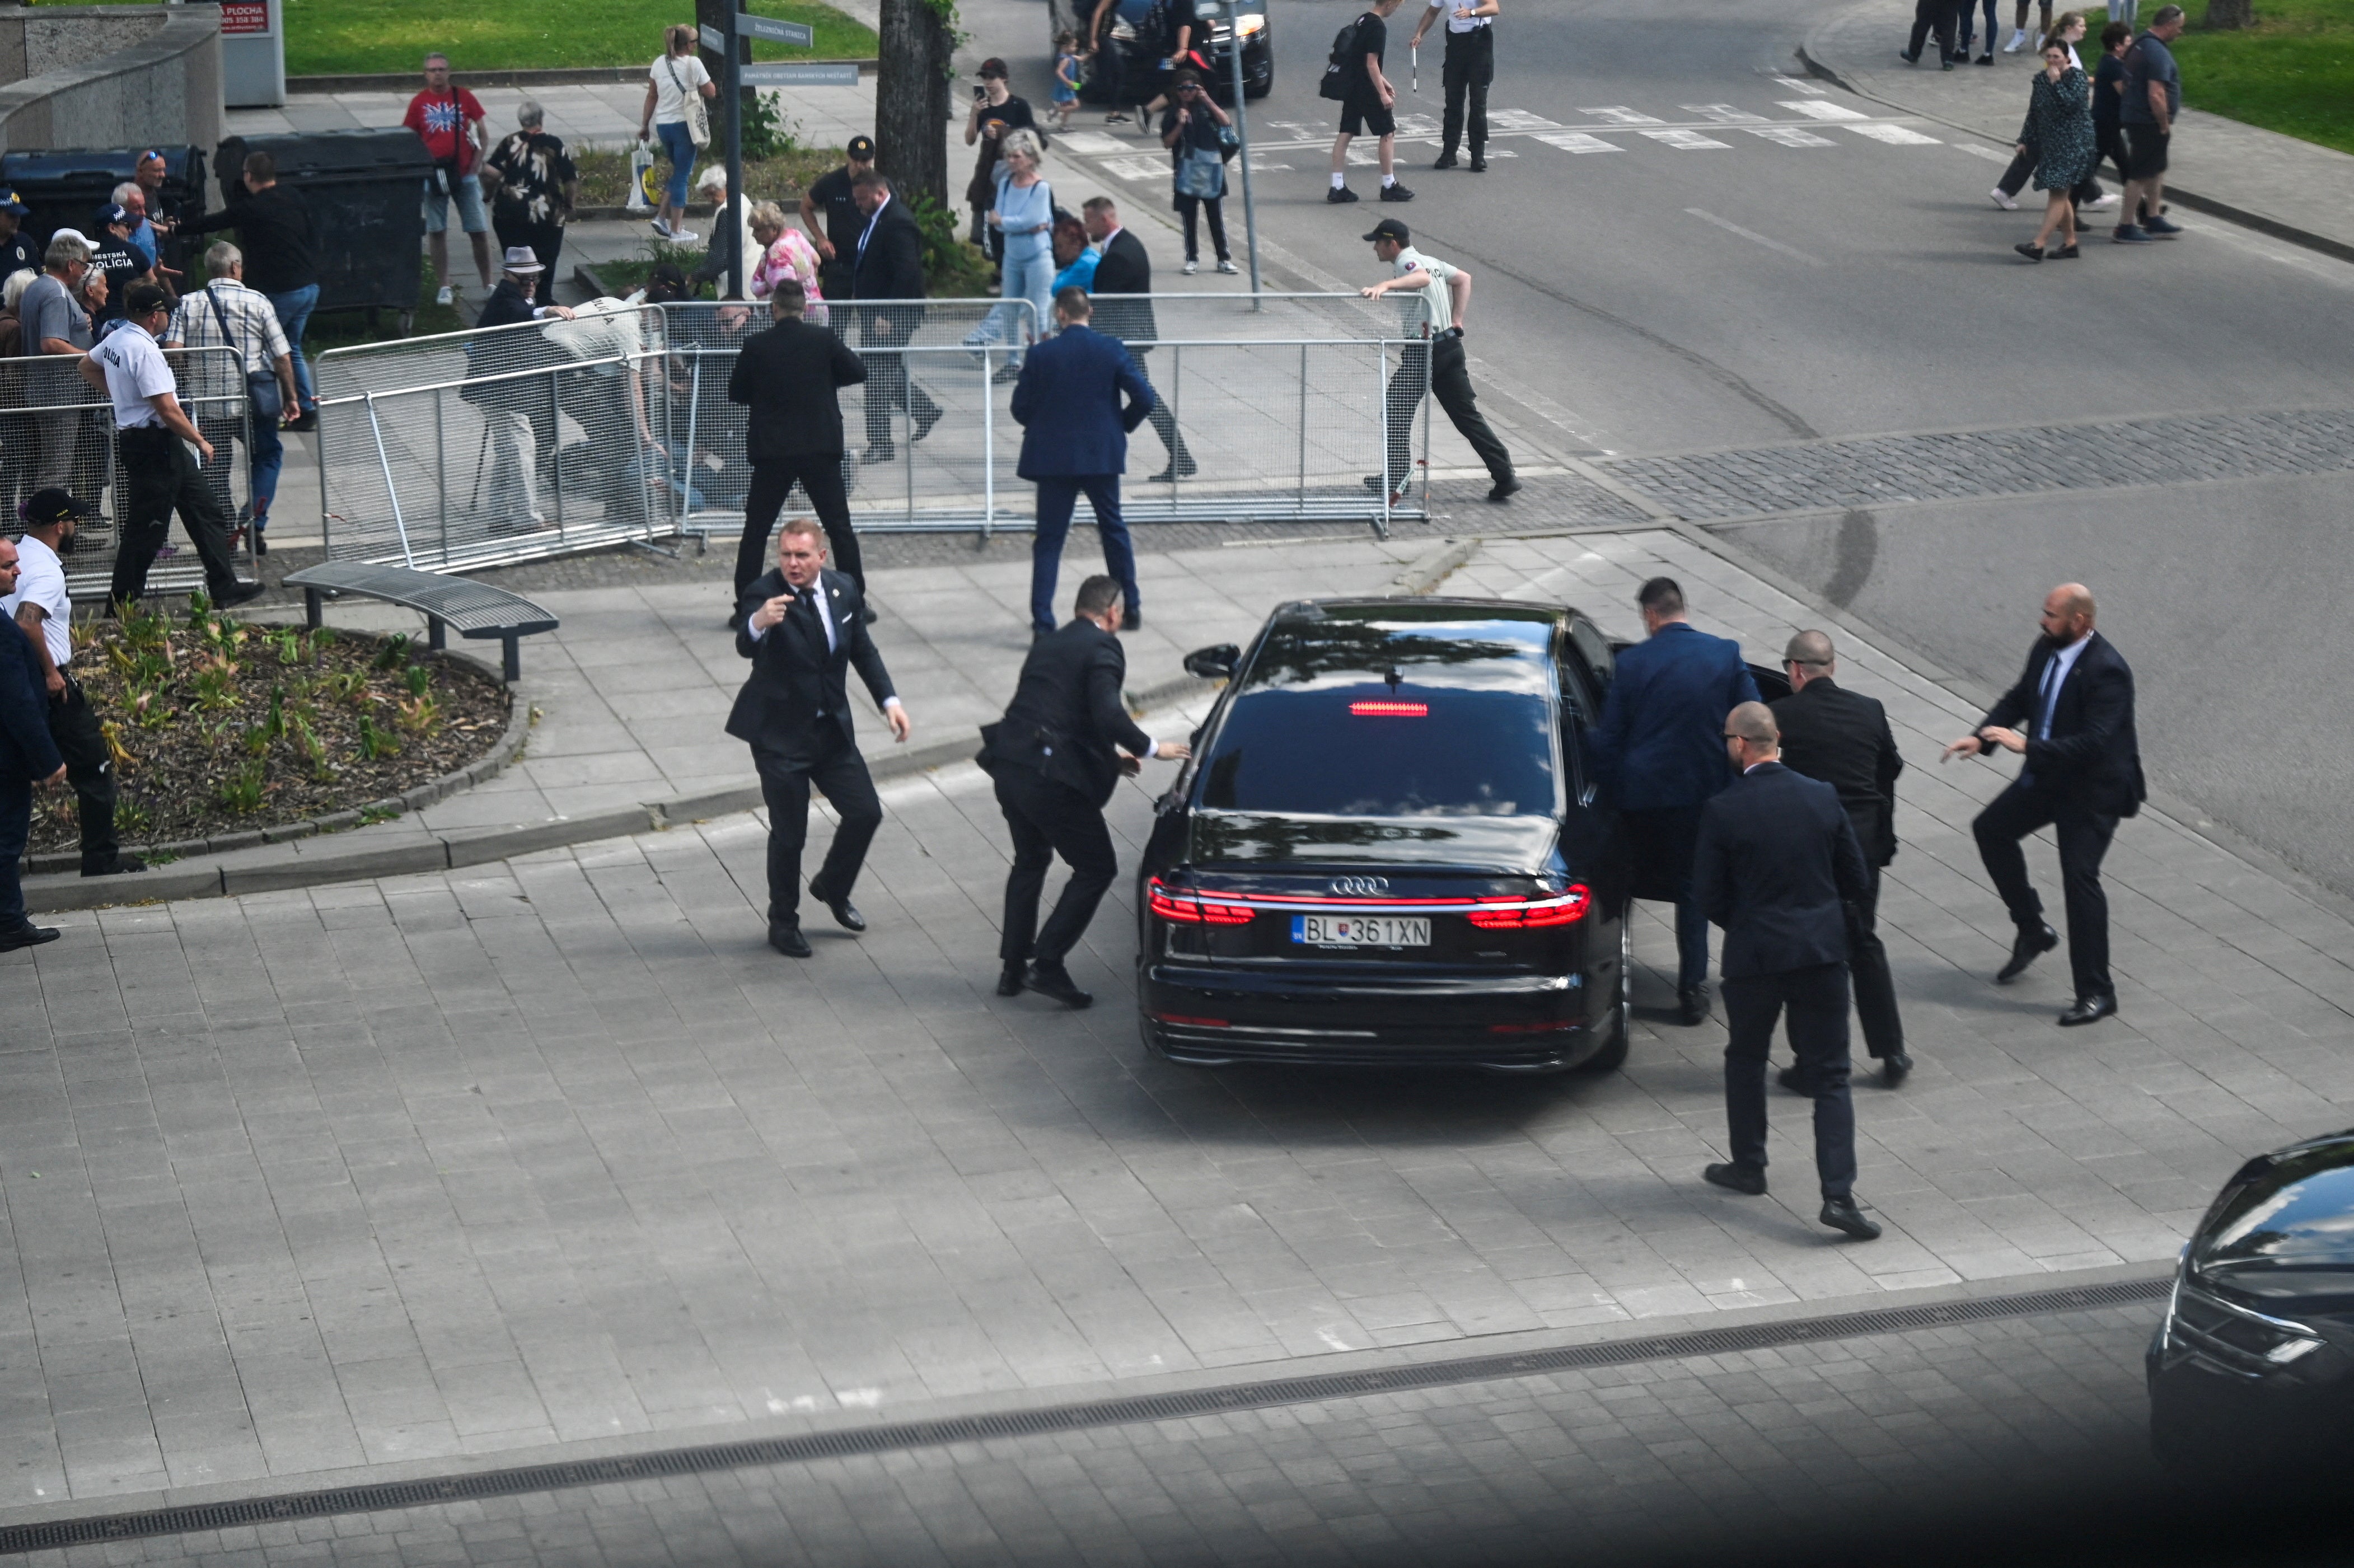 Security officers drag the Slovak PM into his official car after the assassination attempt in Handlova